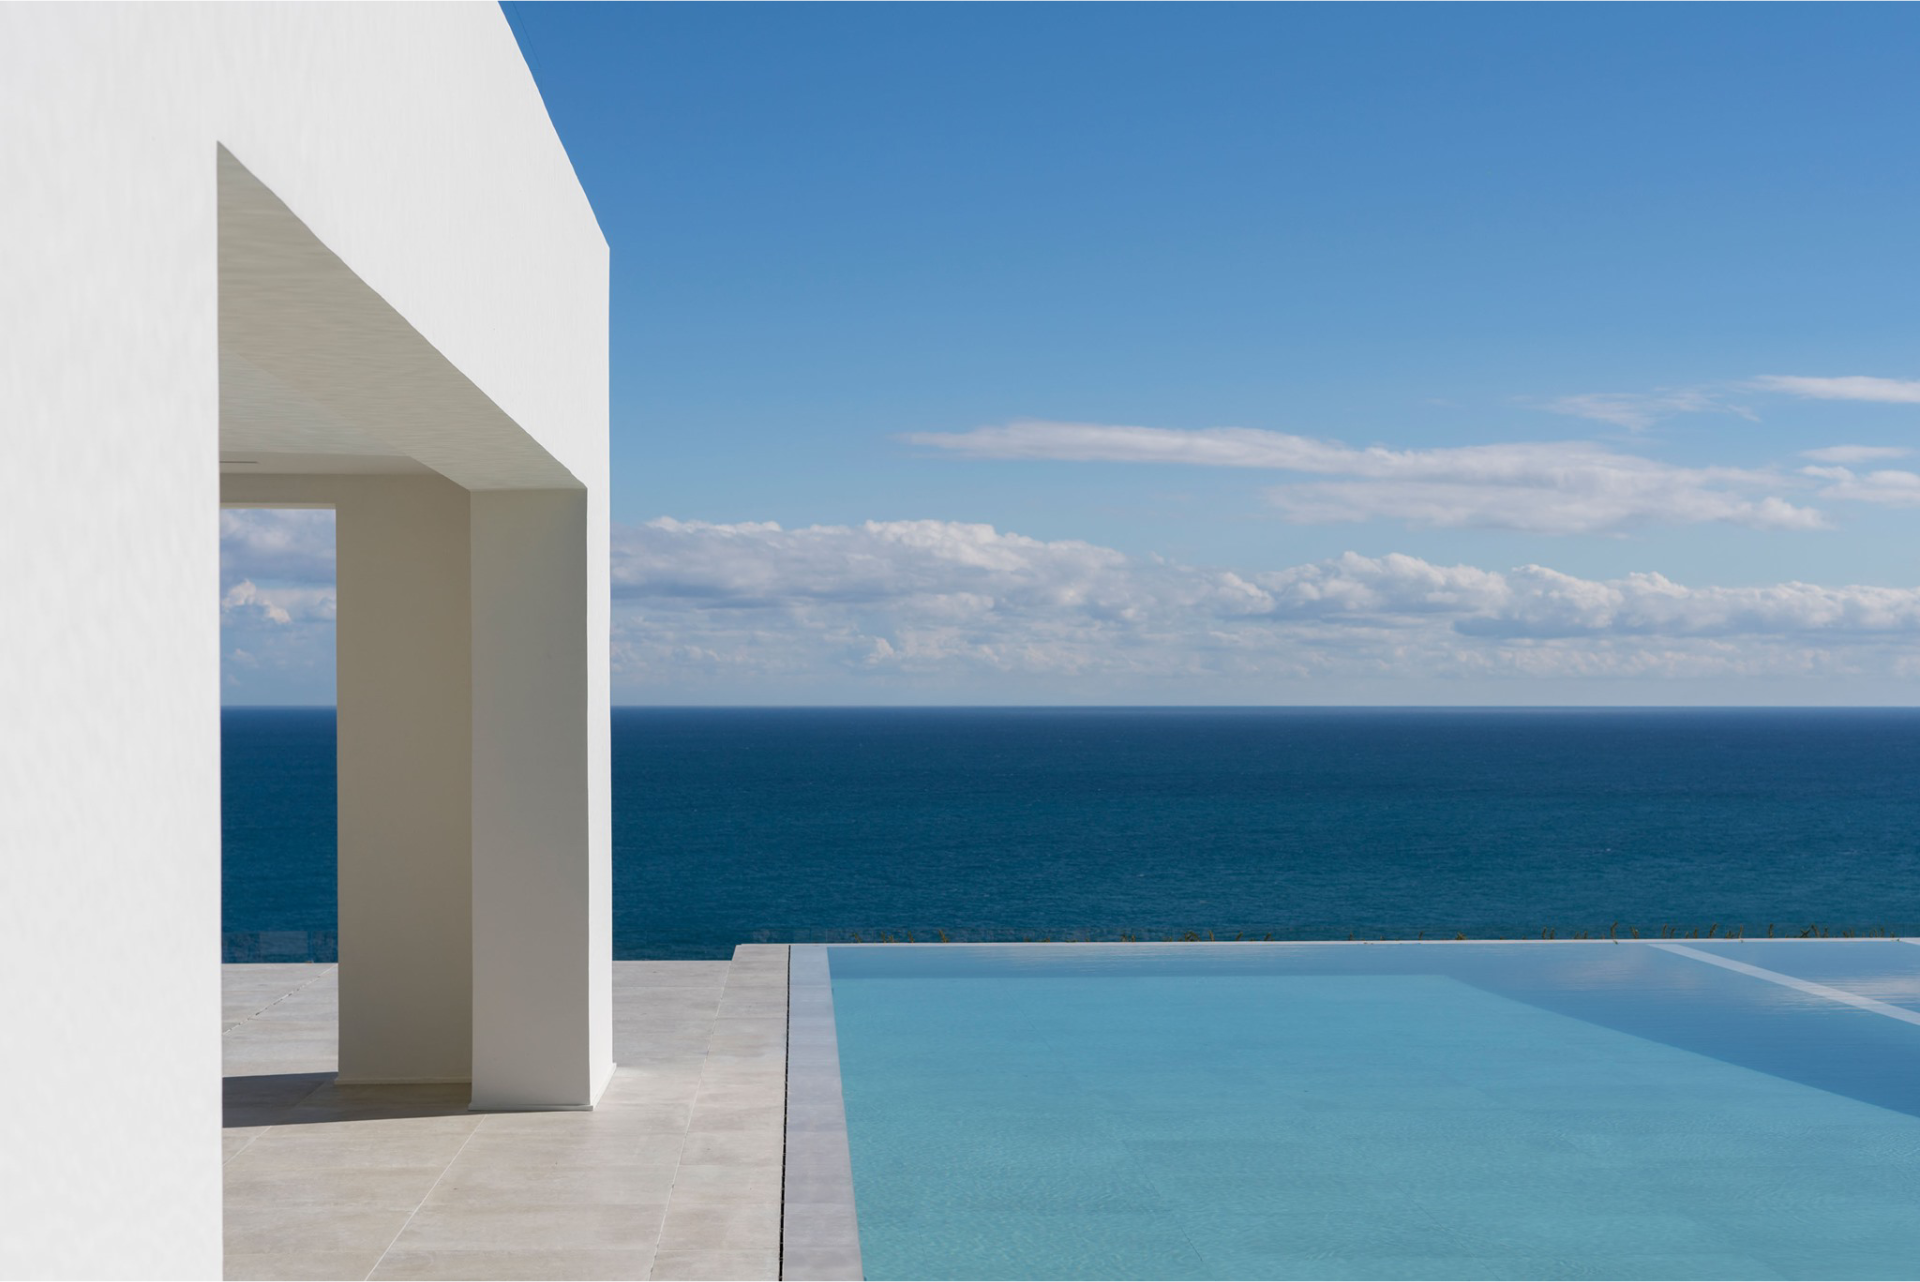 TBB Real Estate - Boutique Real Estate Investment Consultancy in Costa Blanca